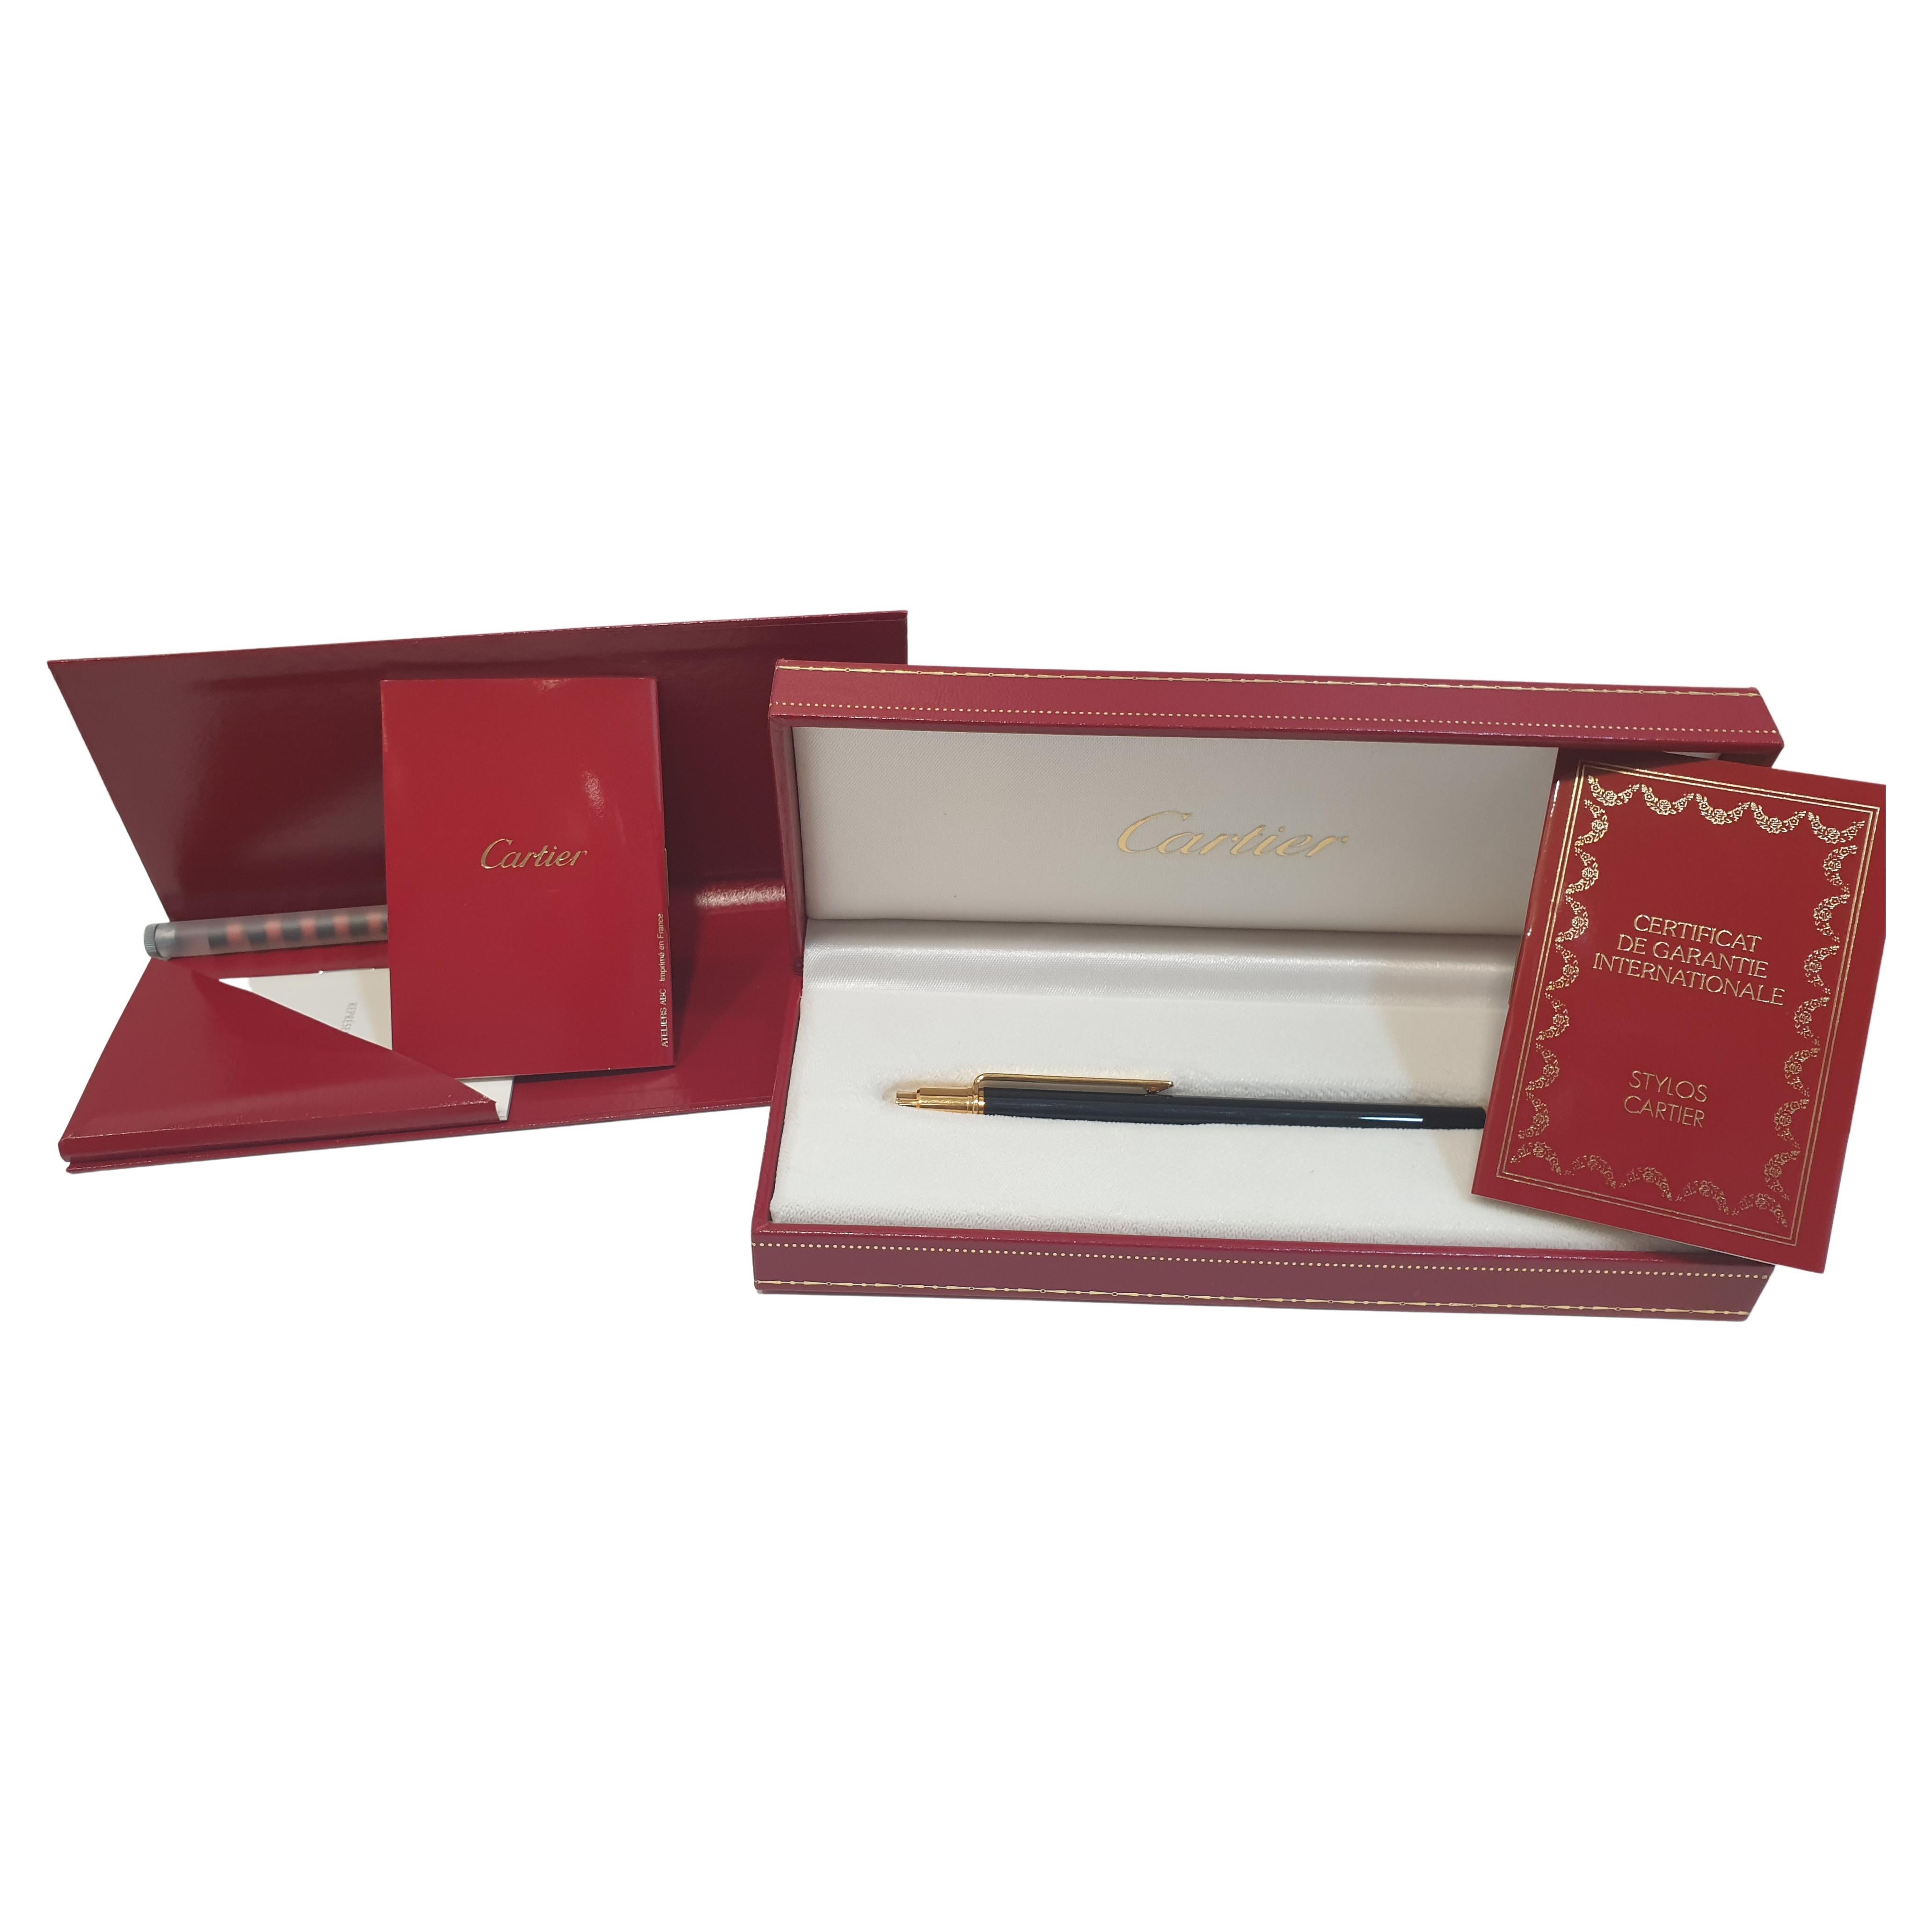 Women's or Men's Le Must de Cartier Gold-Plated Pencil with box and papers 